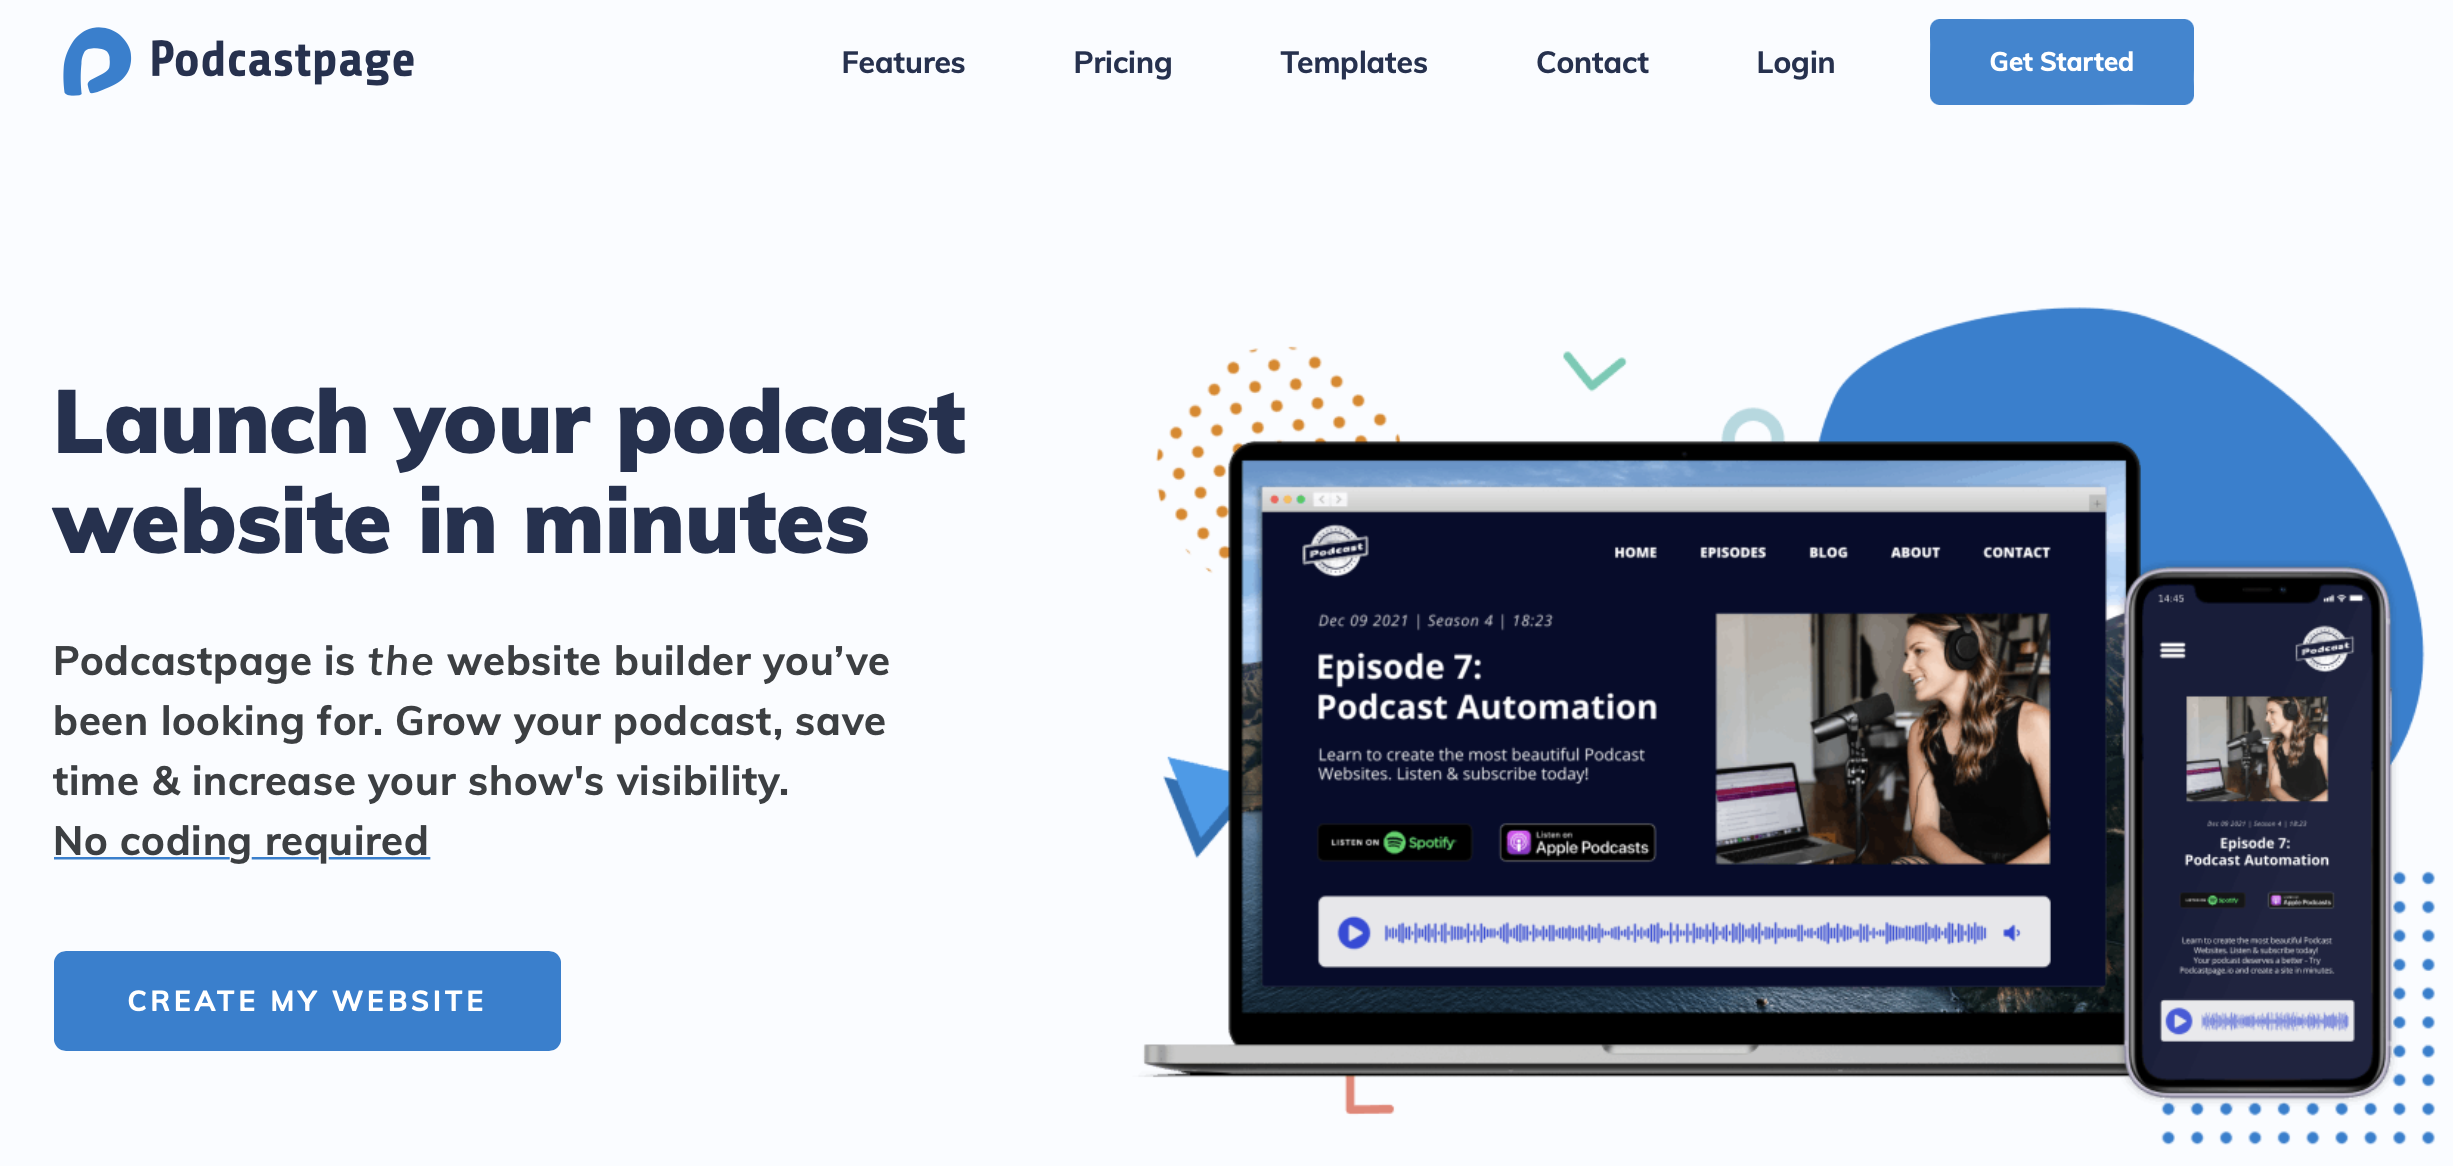 Podcastpage is a website builder specifically for podcasts